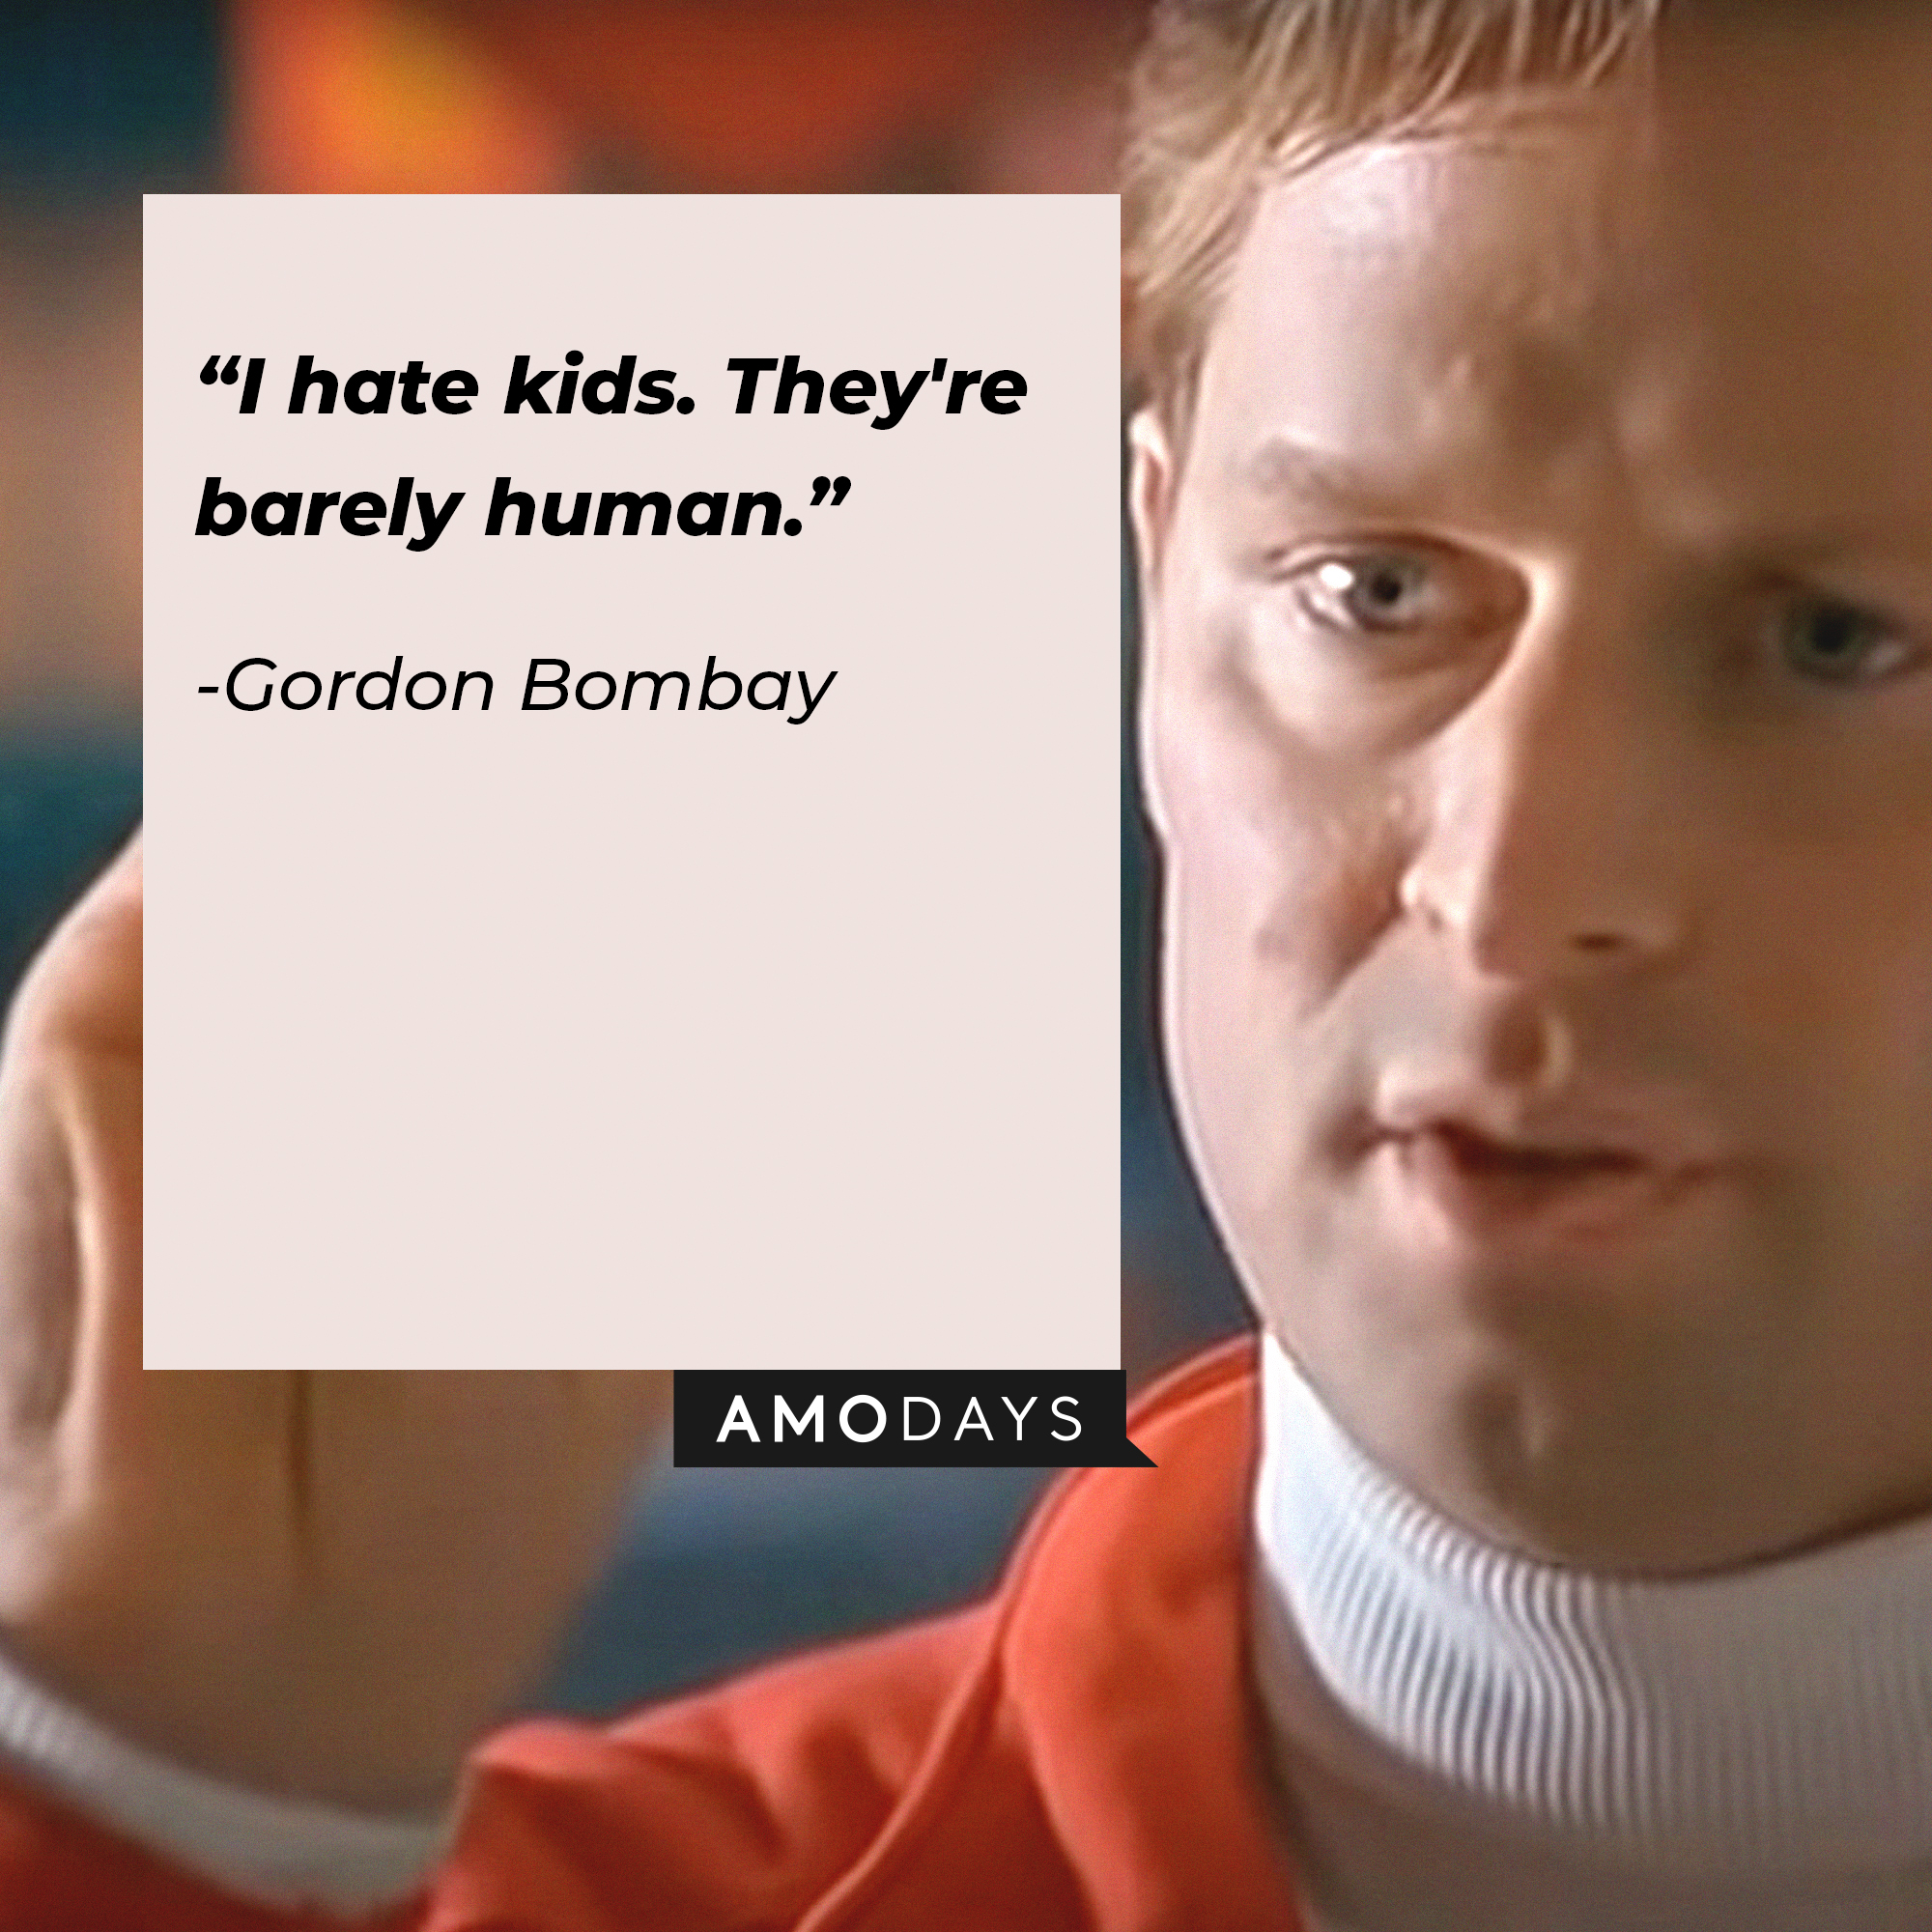 A picture of Gordon Bombay with a quote by him : “I hate kids. They're barely human.” | Source: youtube.com/disneyplus